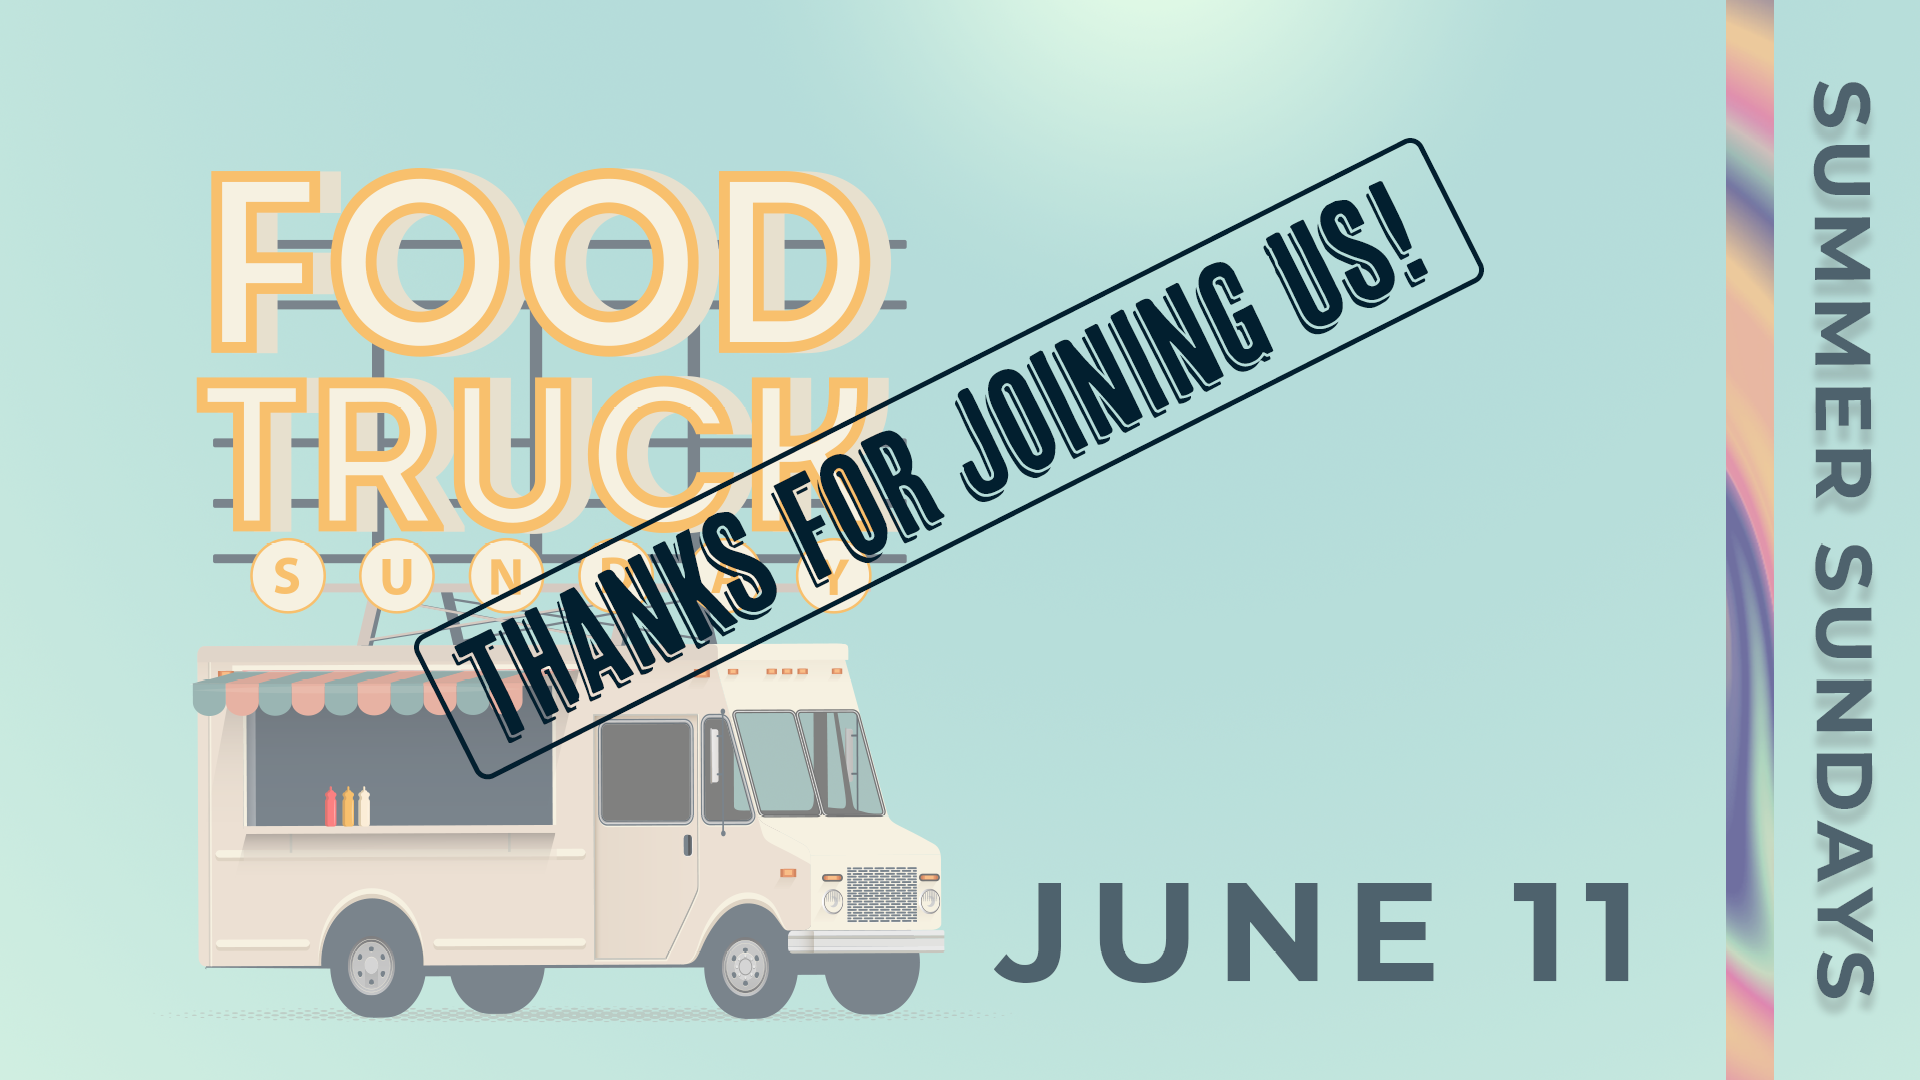 Thanks for joining us at food truck sunday!